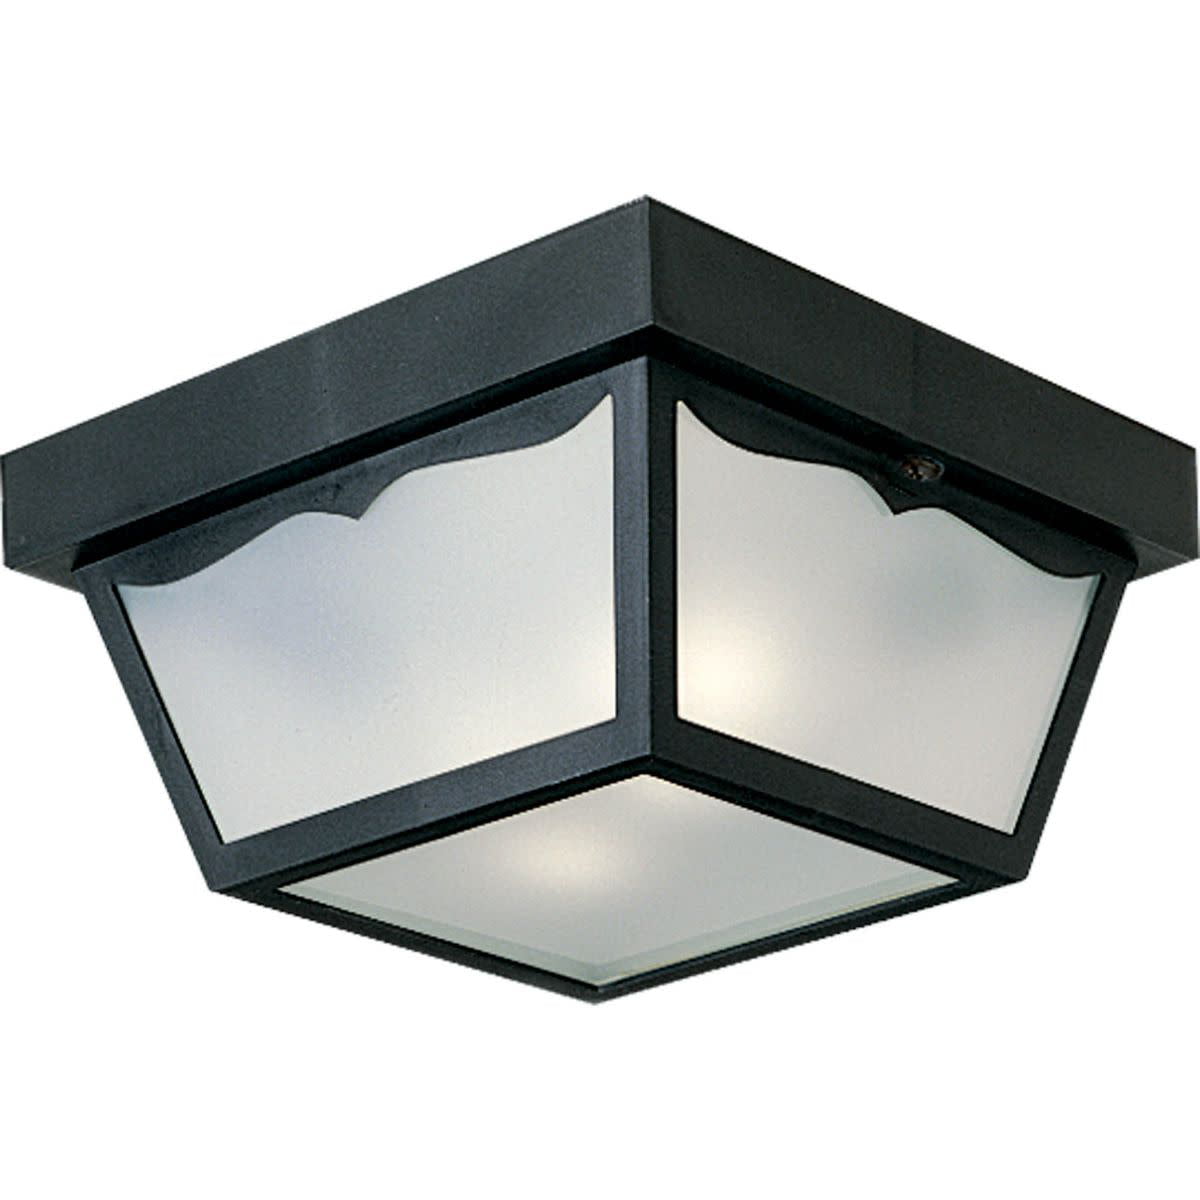 8" Carport Outdoor Ceiling Fixture with Frosted Acrylic Panels NEW Nuvo 77-863